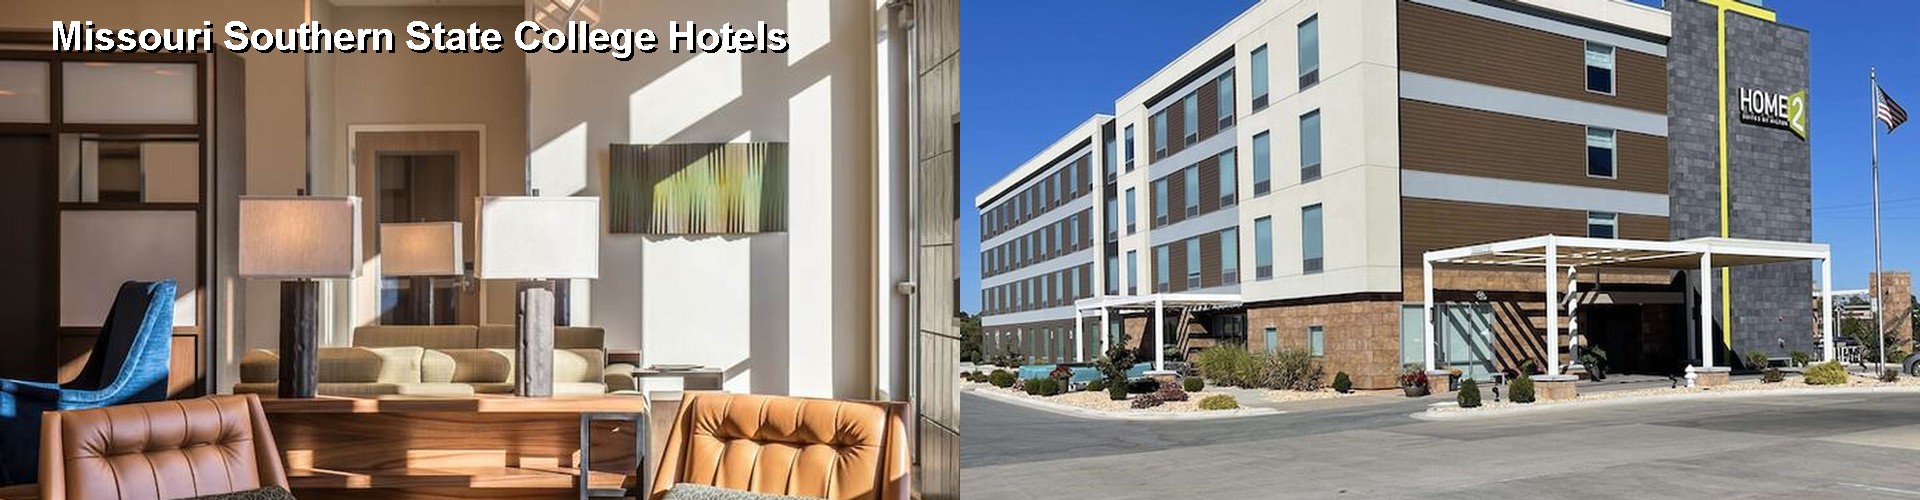 5 Best Hotels near Missouri Southern State College